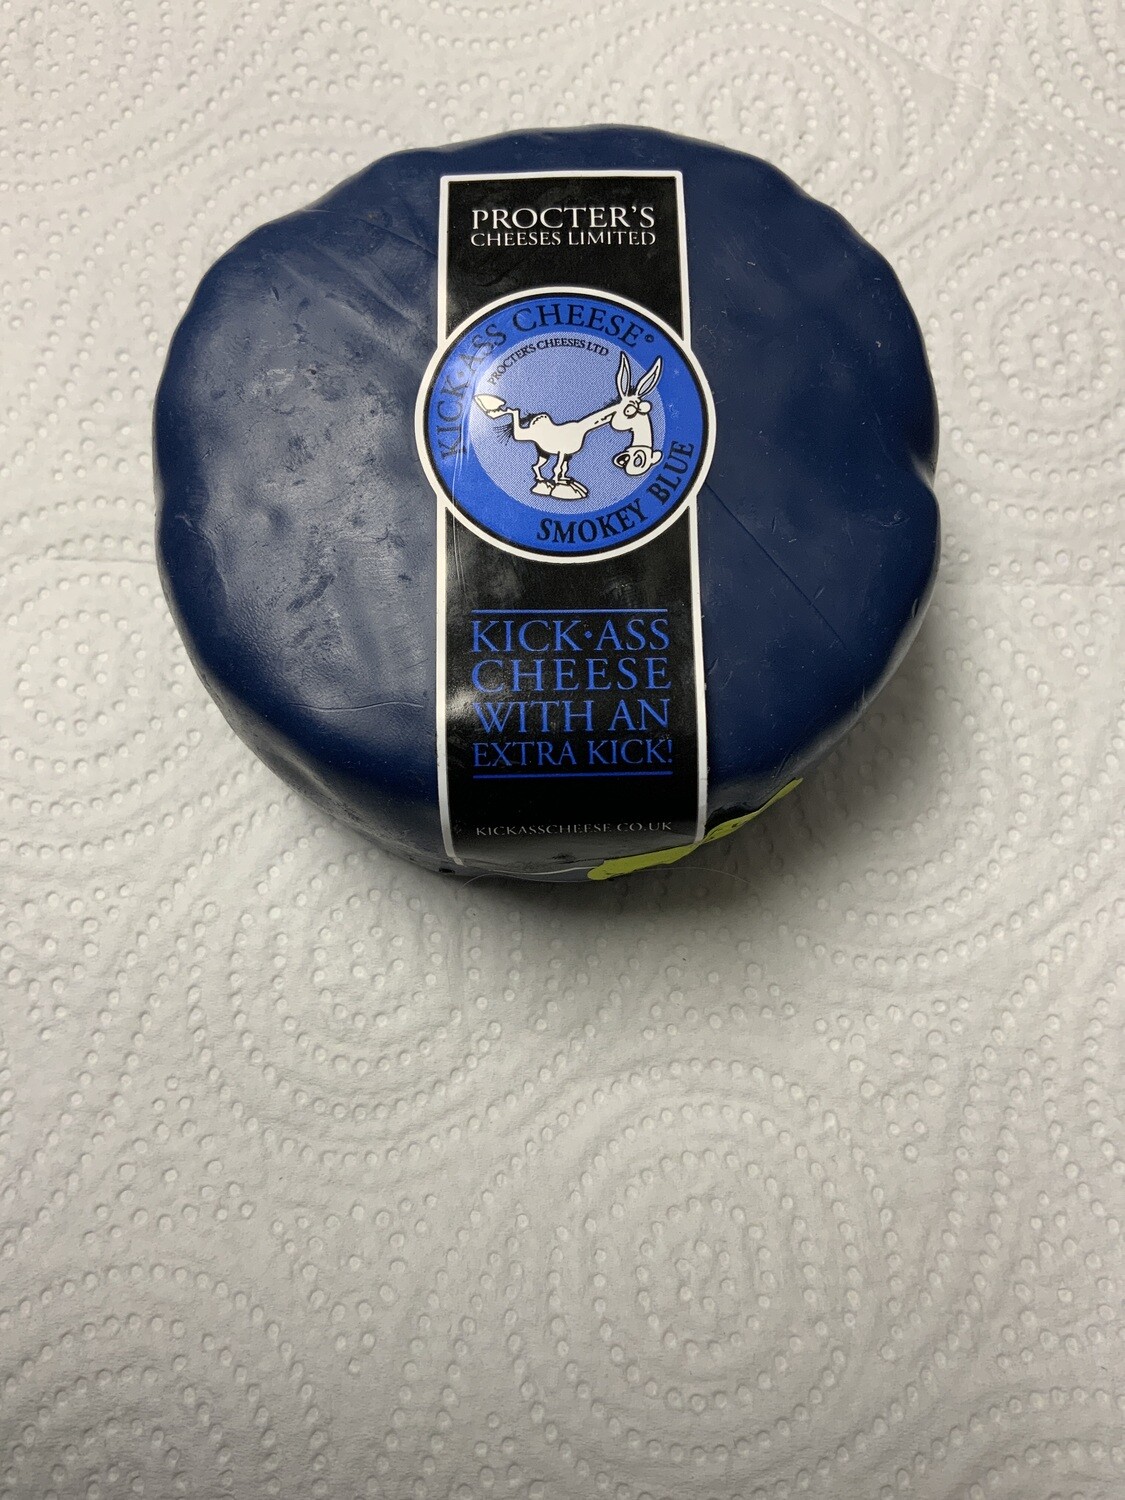 Kick-Ass Mature Blue Cheese with a Smokey flavour.